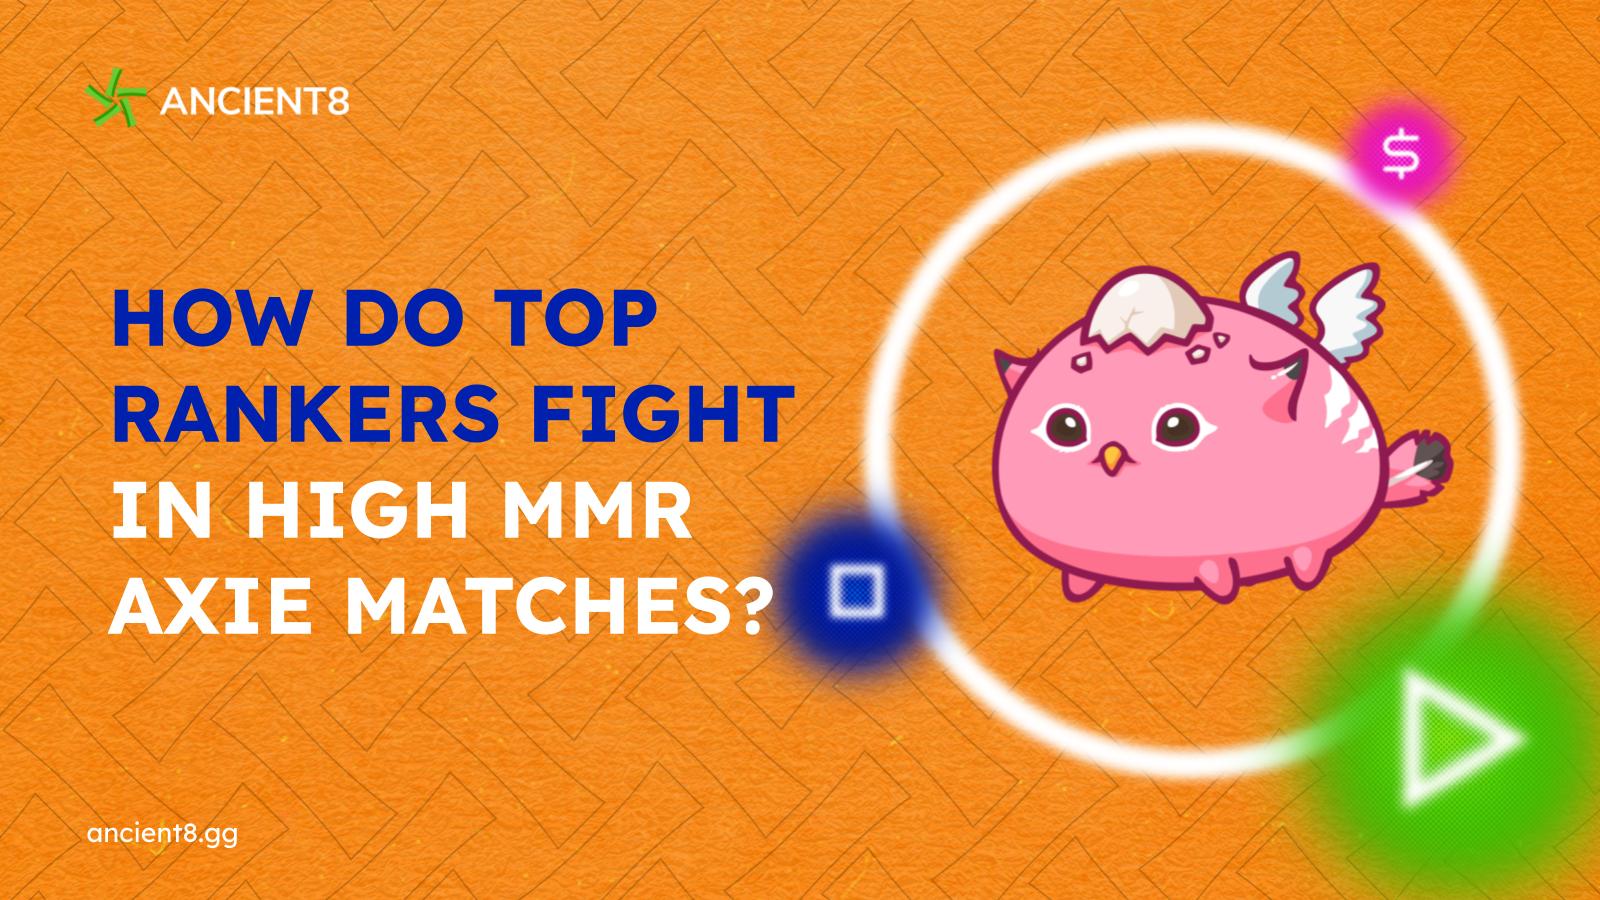 How do top rankers fight in high MMR Axie matches?